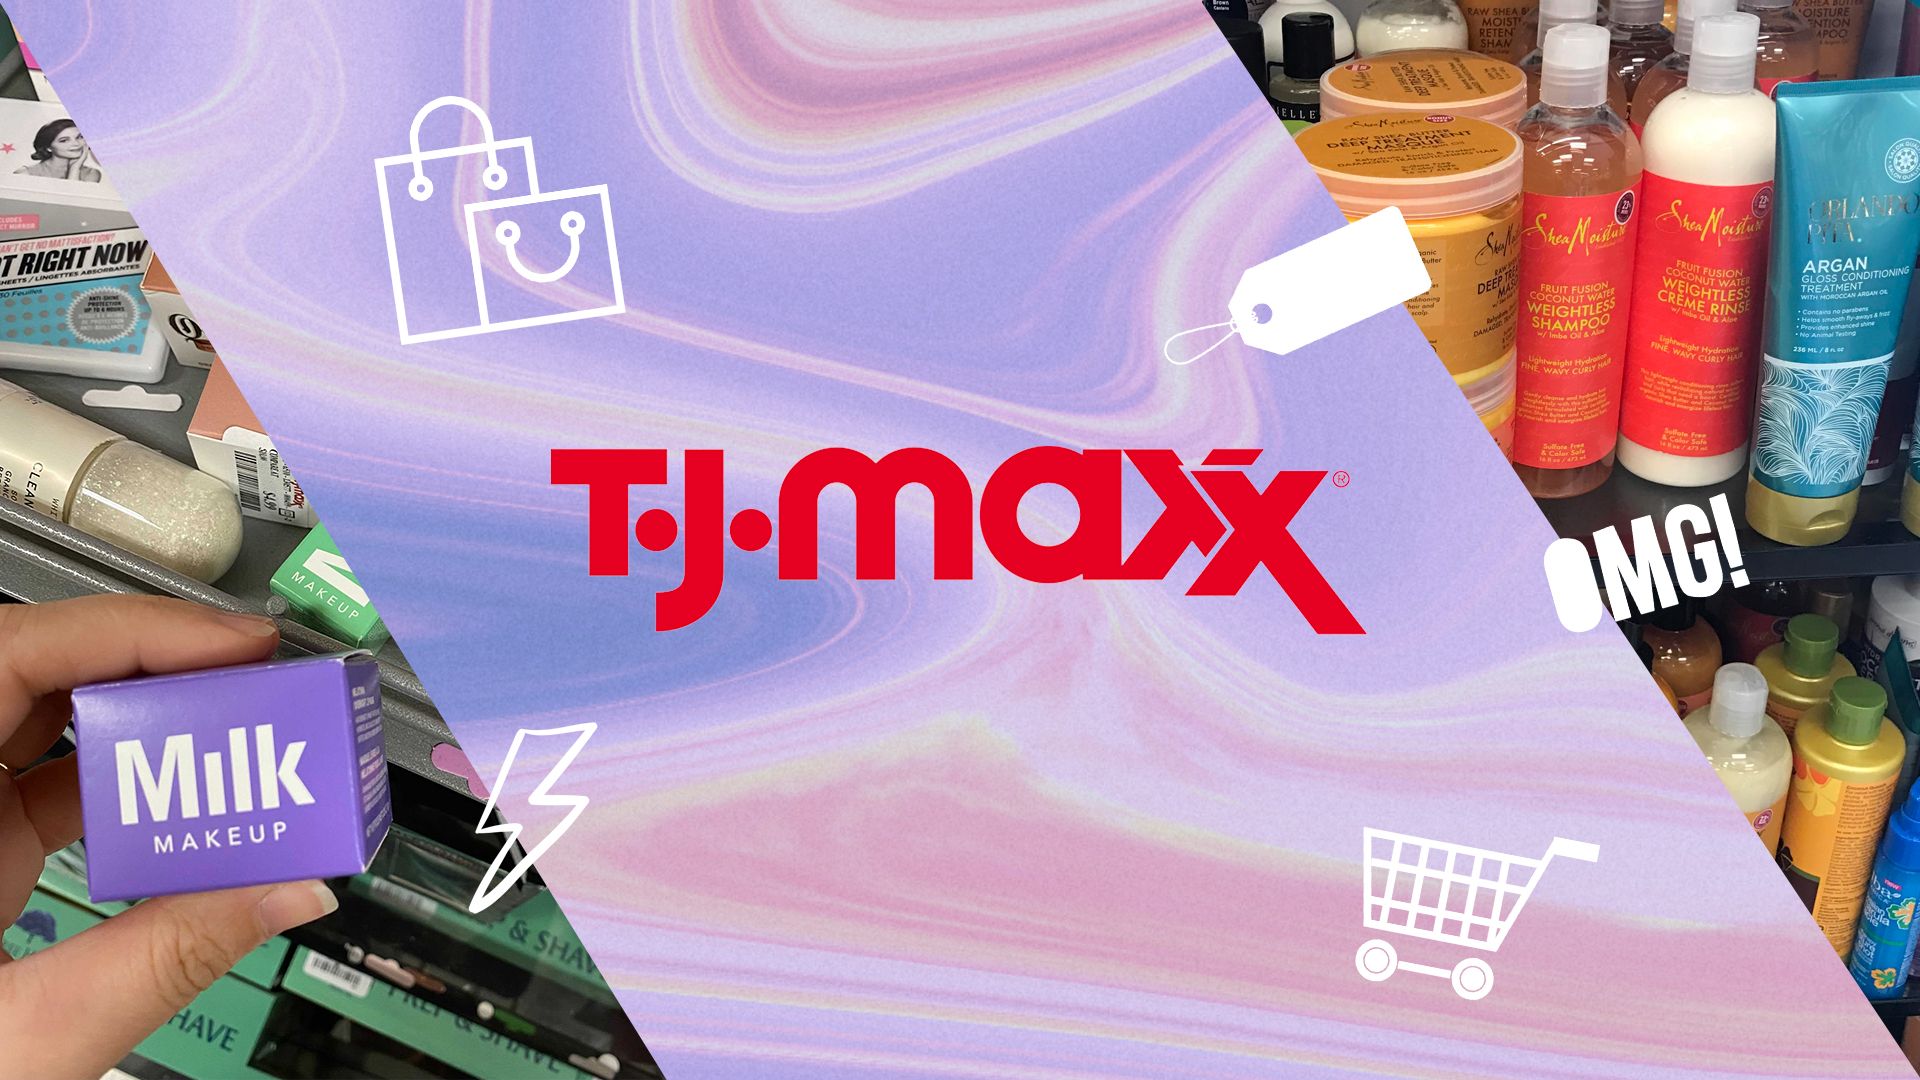 TJ Maxx Just Made Shopping Much Easier